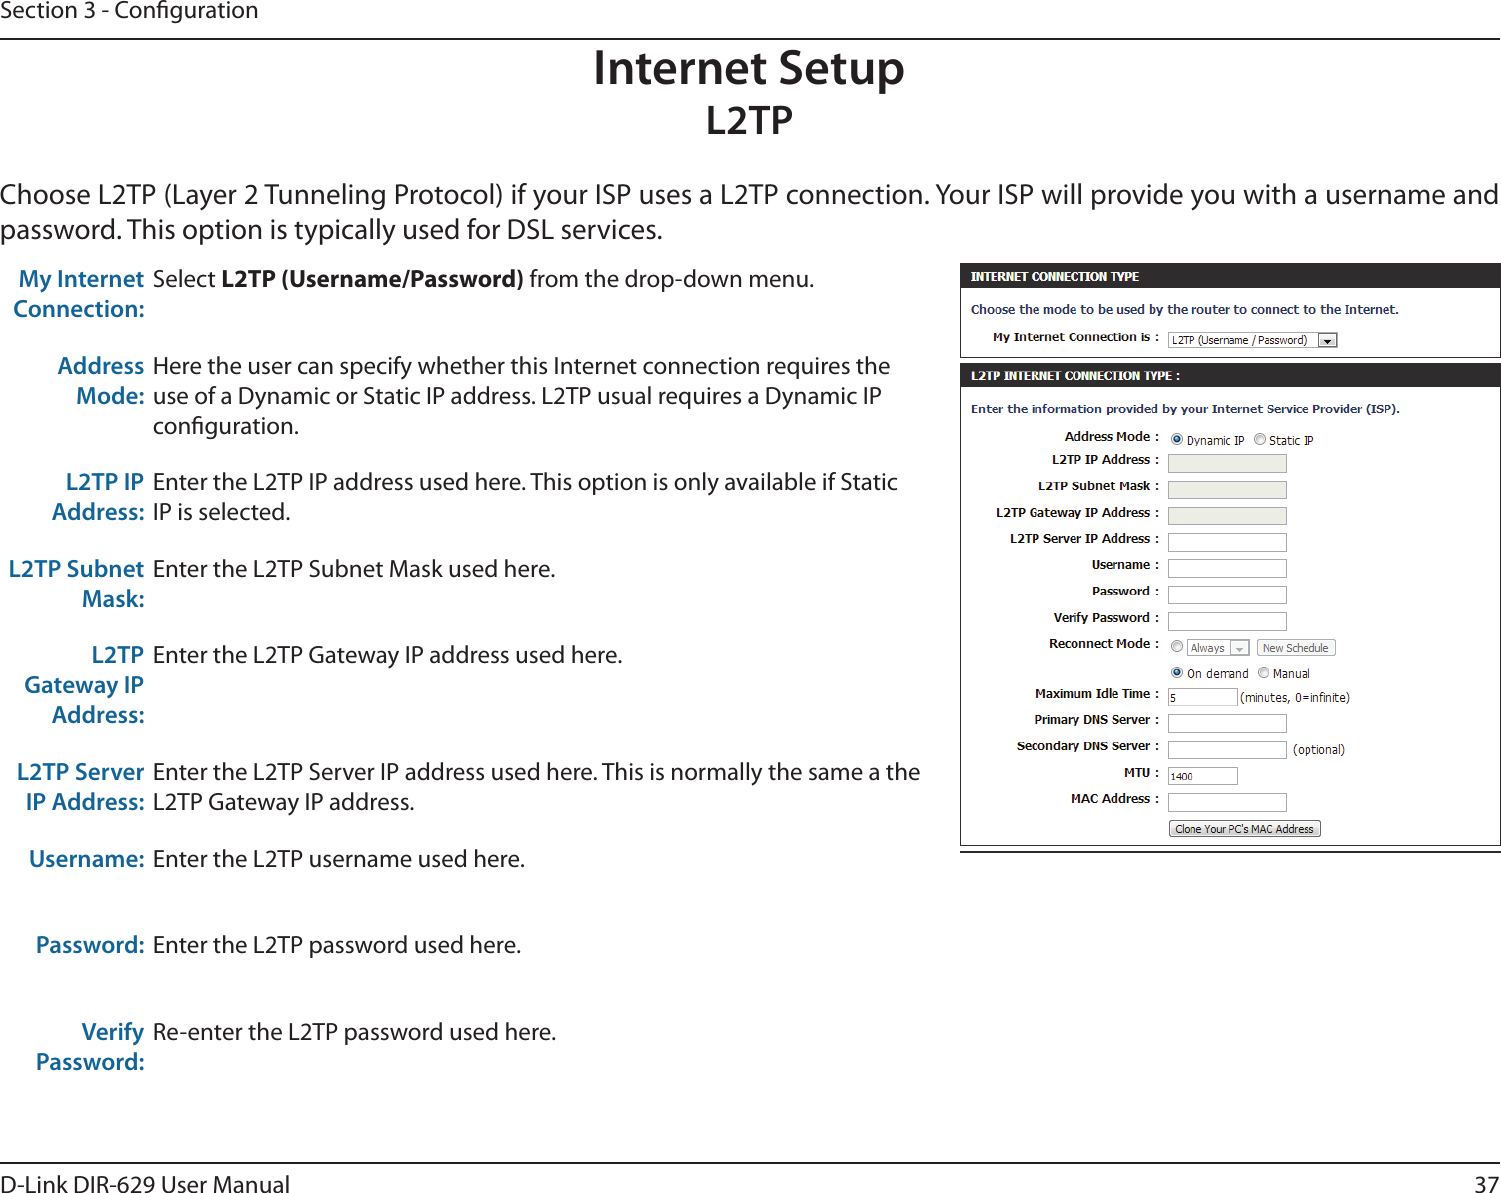 37D-Link DIR-629 User ManualSection 3 - CongurationInternet SetupL2TPpassword. This option is typically used for DSL services. My Internet Connection:Select  from the drop-down menu.Address Mode:conguration.L2TP IP Address:Enter the L2TP IP address used here. This option is only available if Static IP is selected.L2TP Subnet Mask:Enter the L2TP Subnet Mask used here.L2TP Gateway IP Address:Enter the L2TP Gateway IP address used here.L2TP Server IP Address:Enter the L2TP Server IP address used here. This is normally the same a the L2TP Gateway IP address.Username: Enter the L2TP username used here.Password: Enter the L2TP password used here.Verify Password: